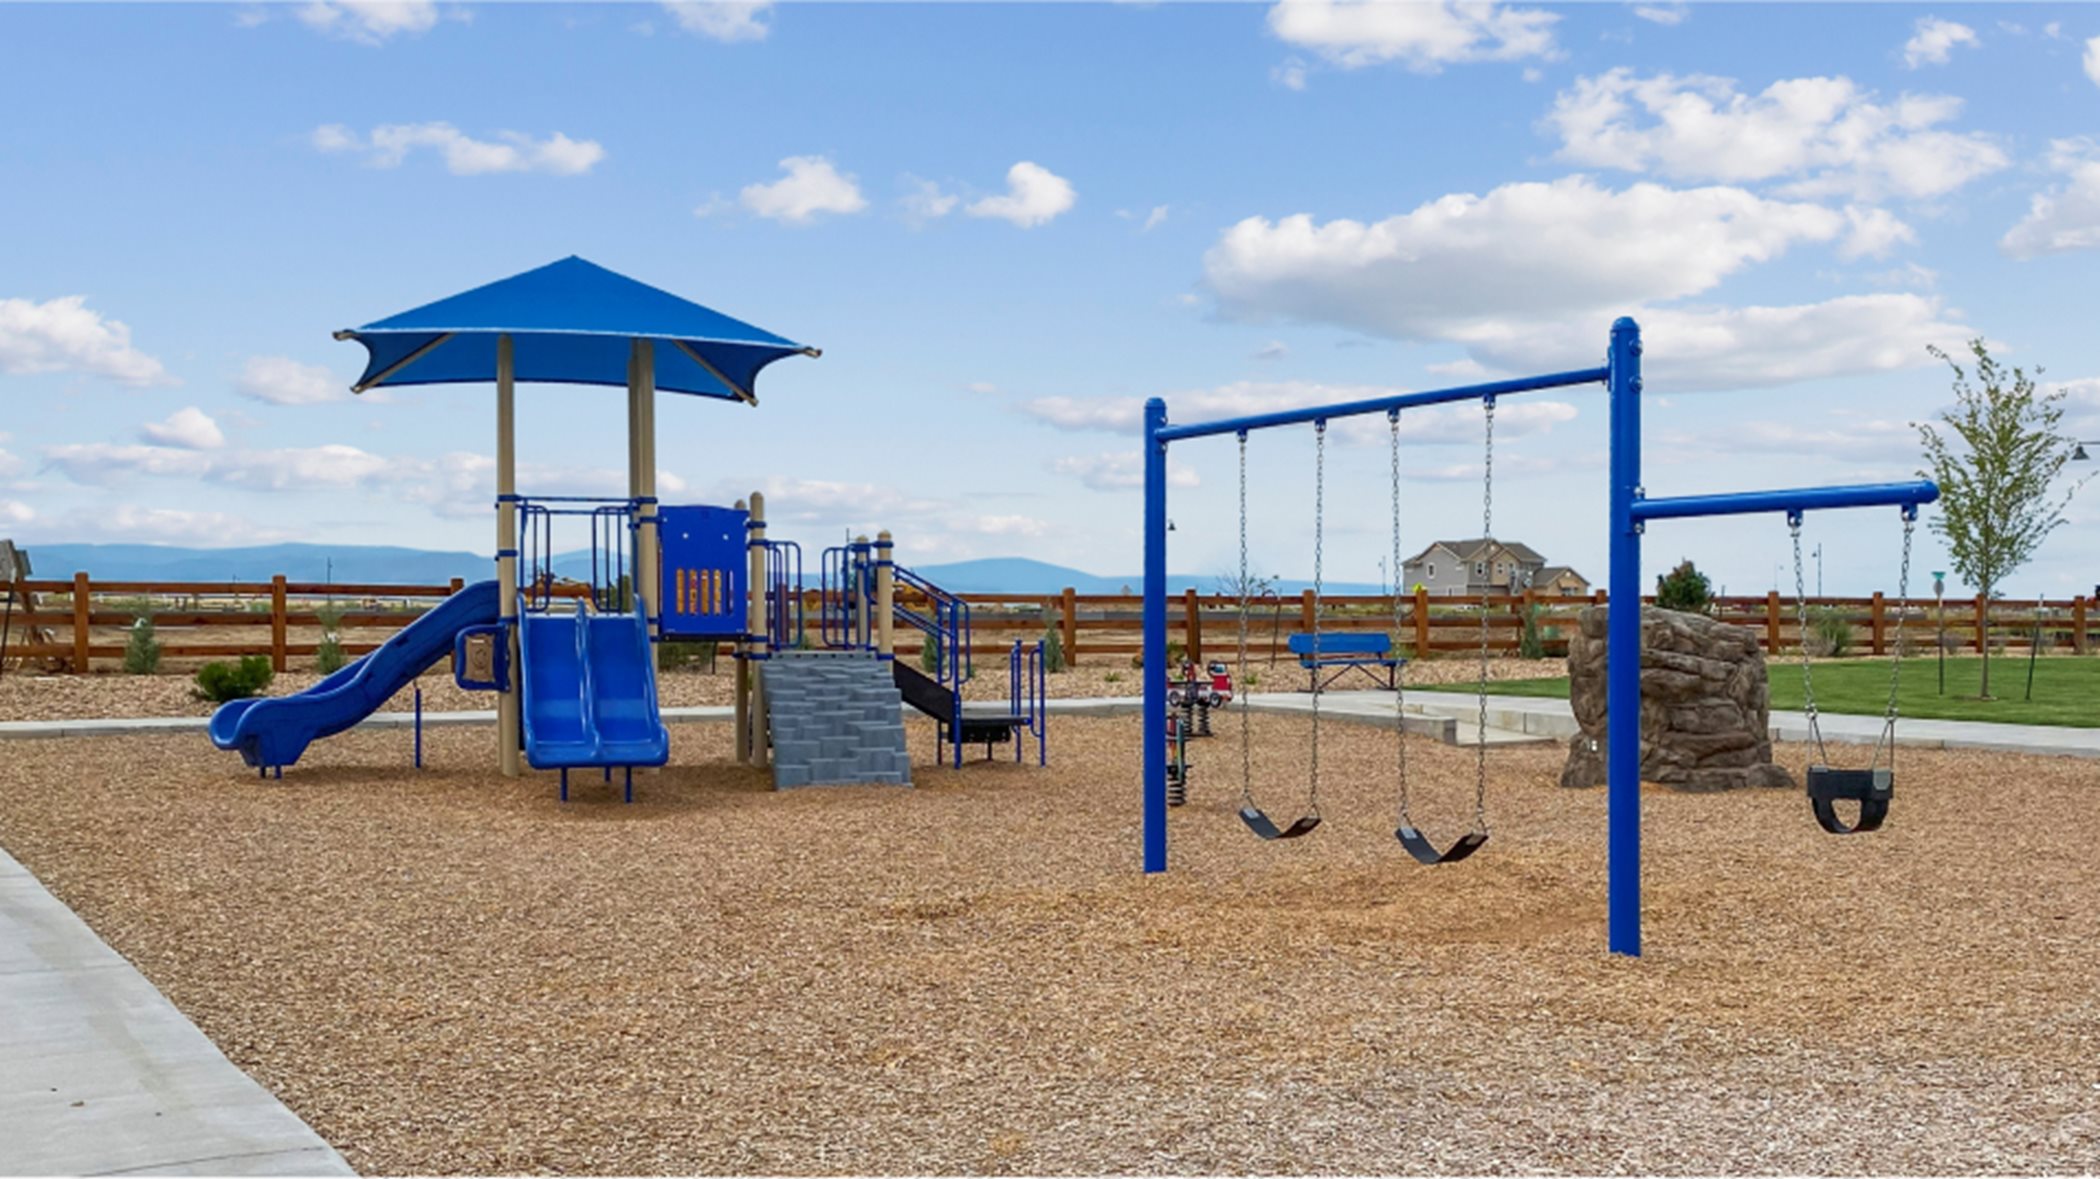 Jungle gym and swing sets at the playground